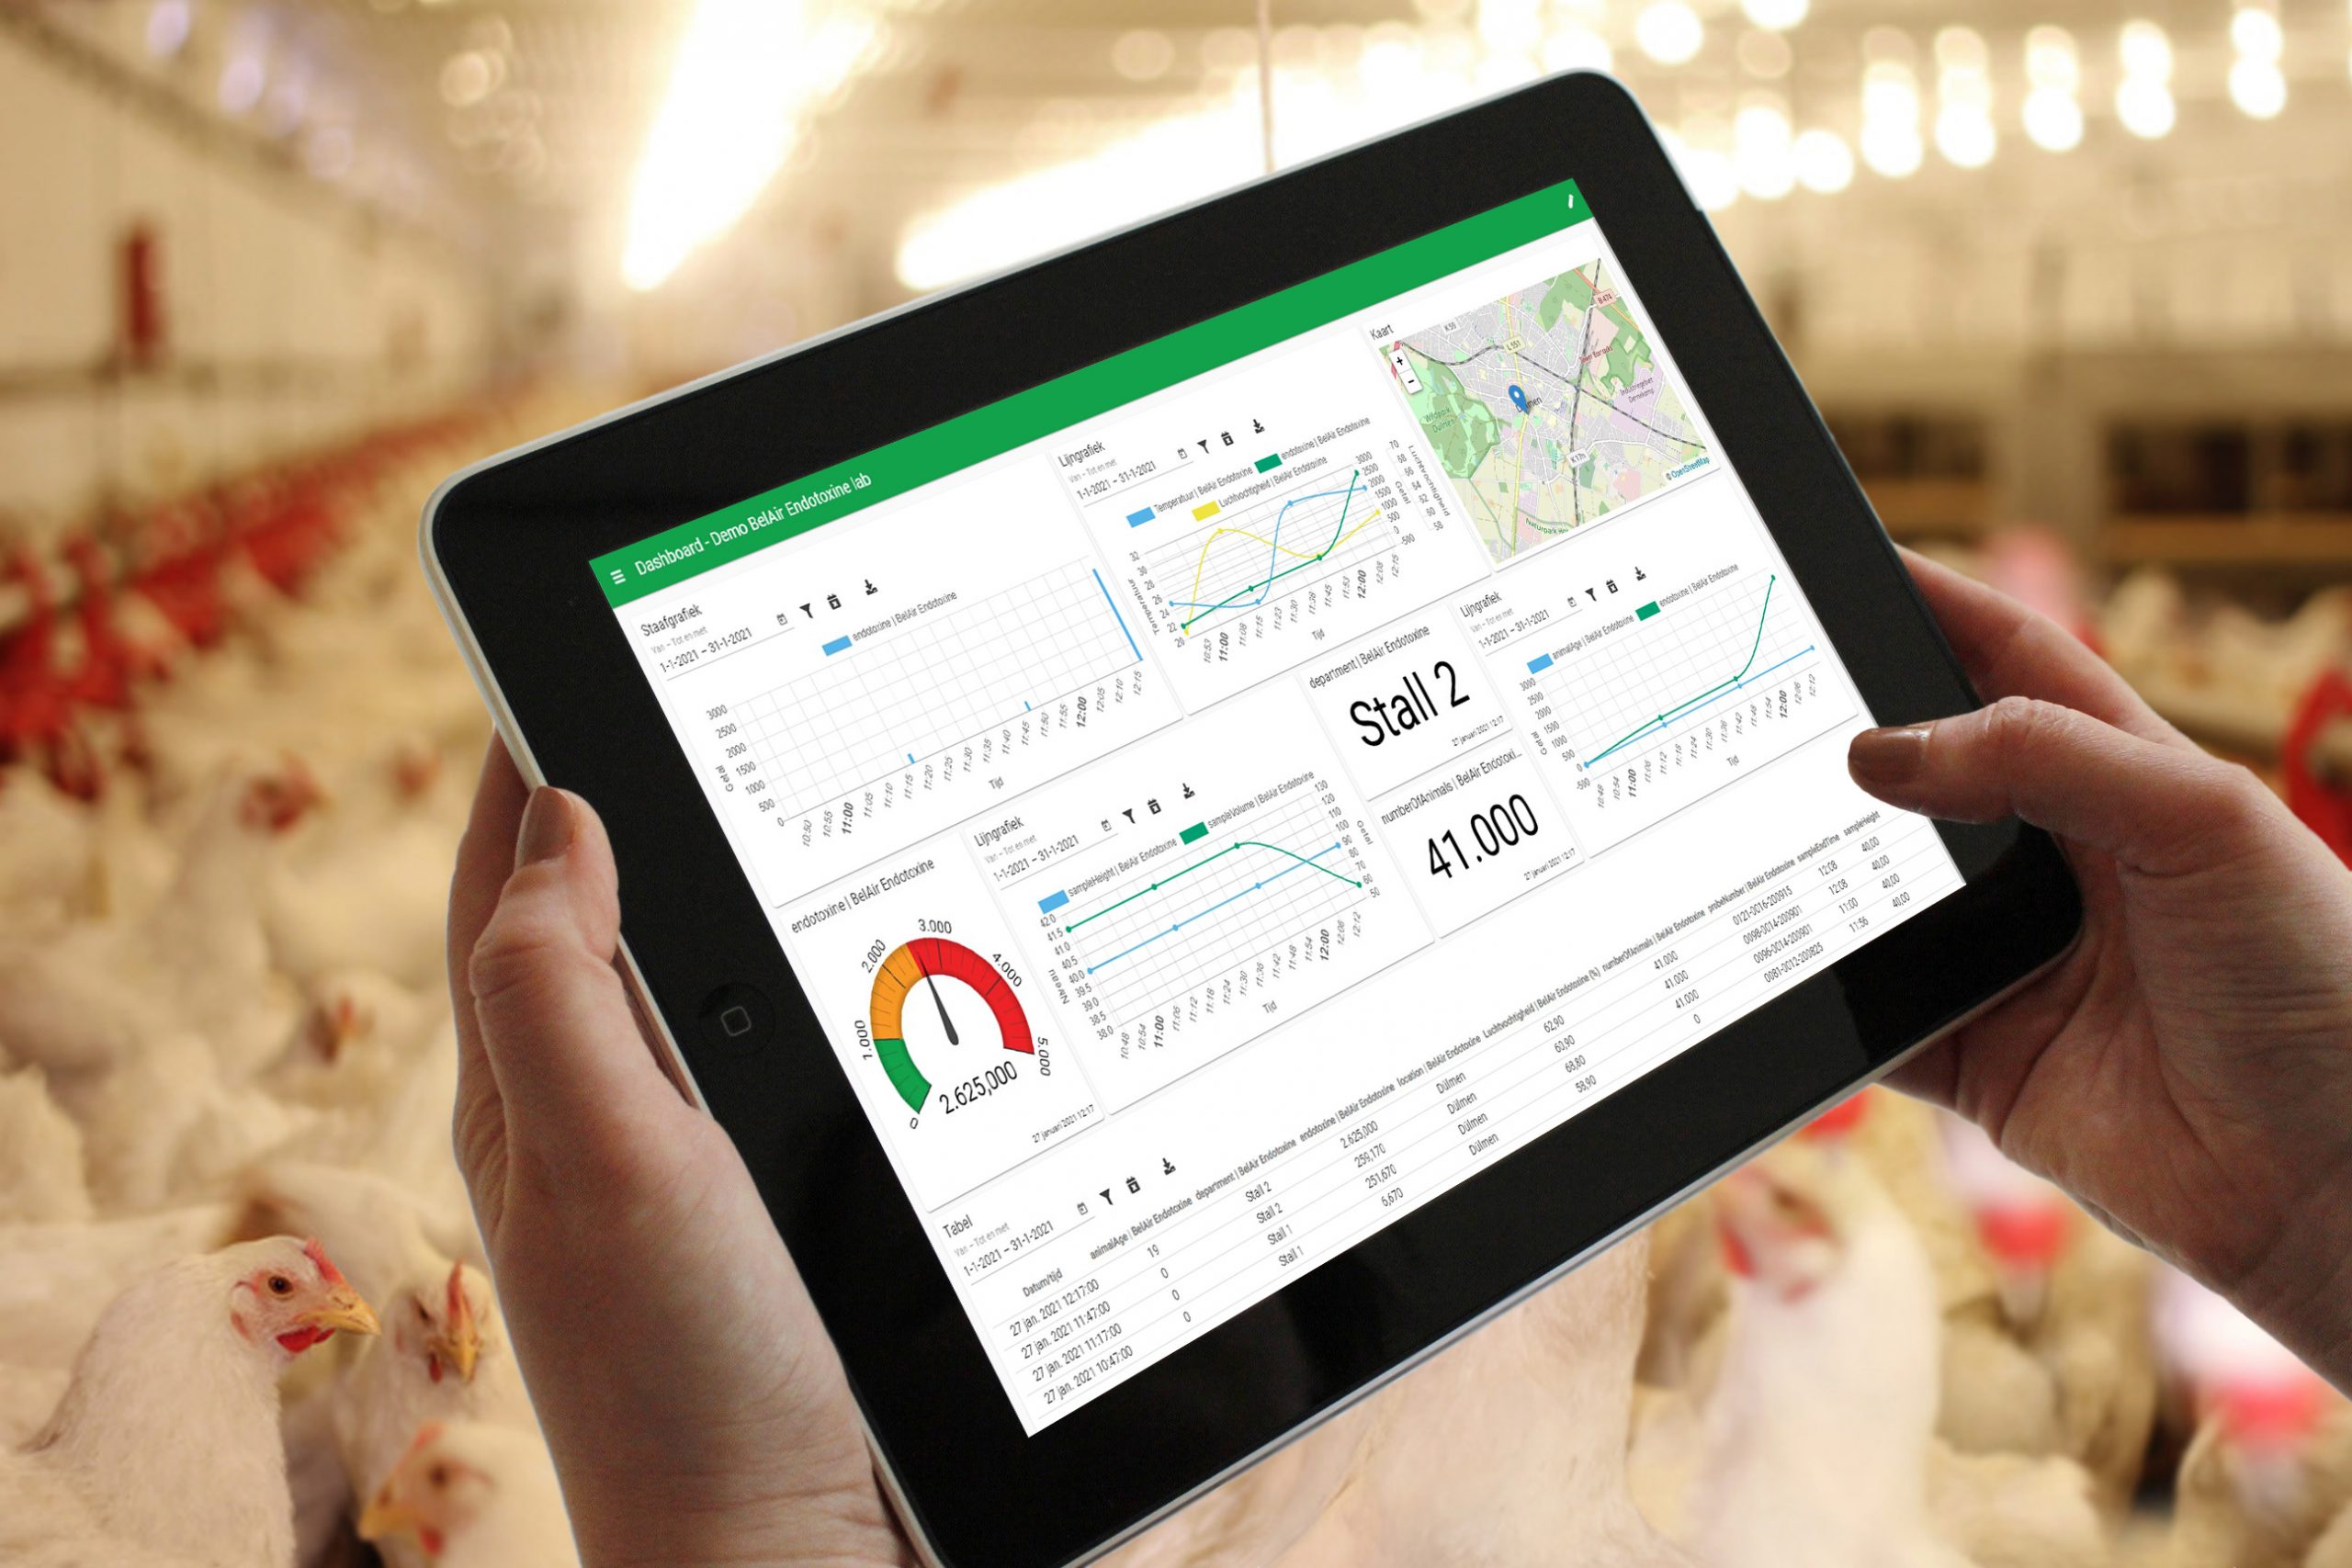 Endotoxin dashboard developed for air quality in poultry houses